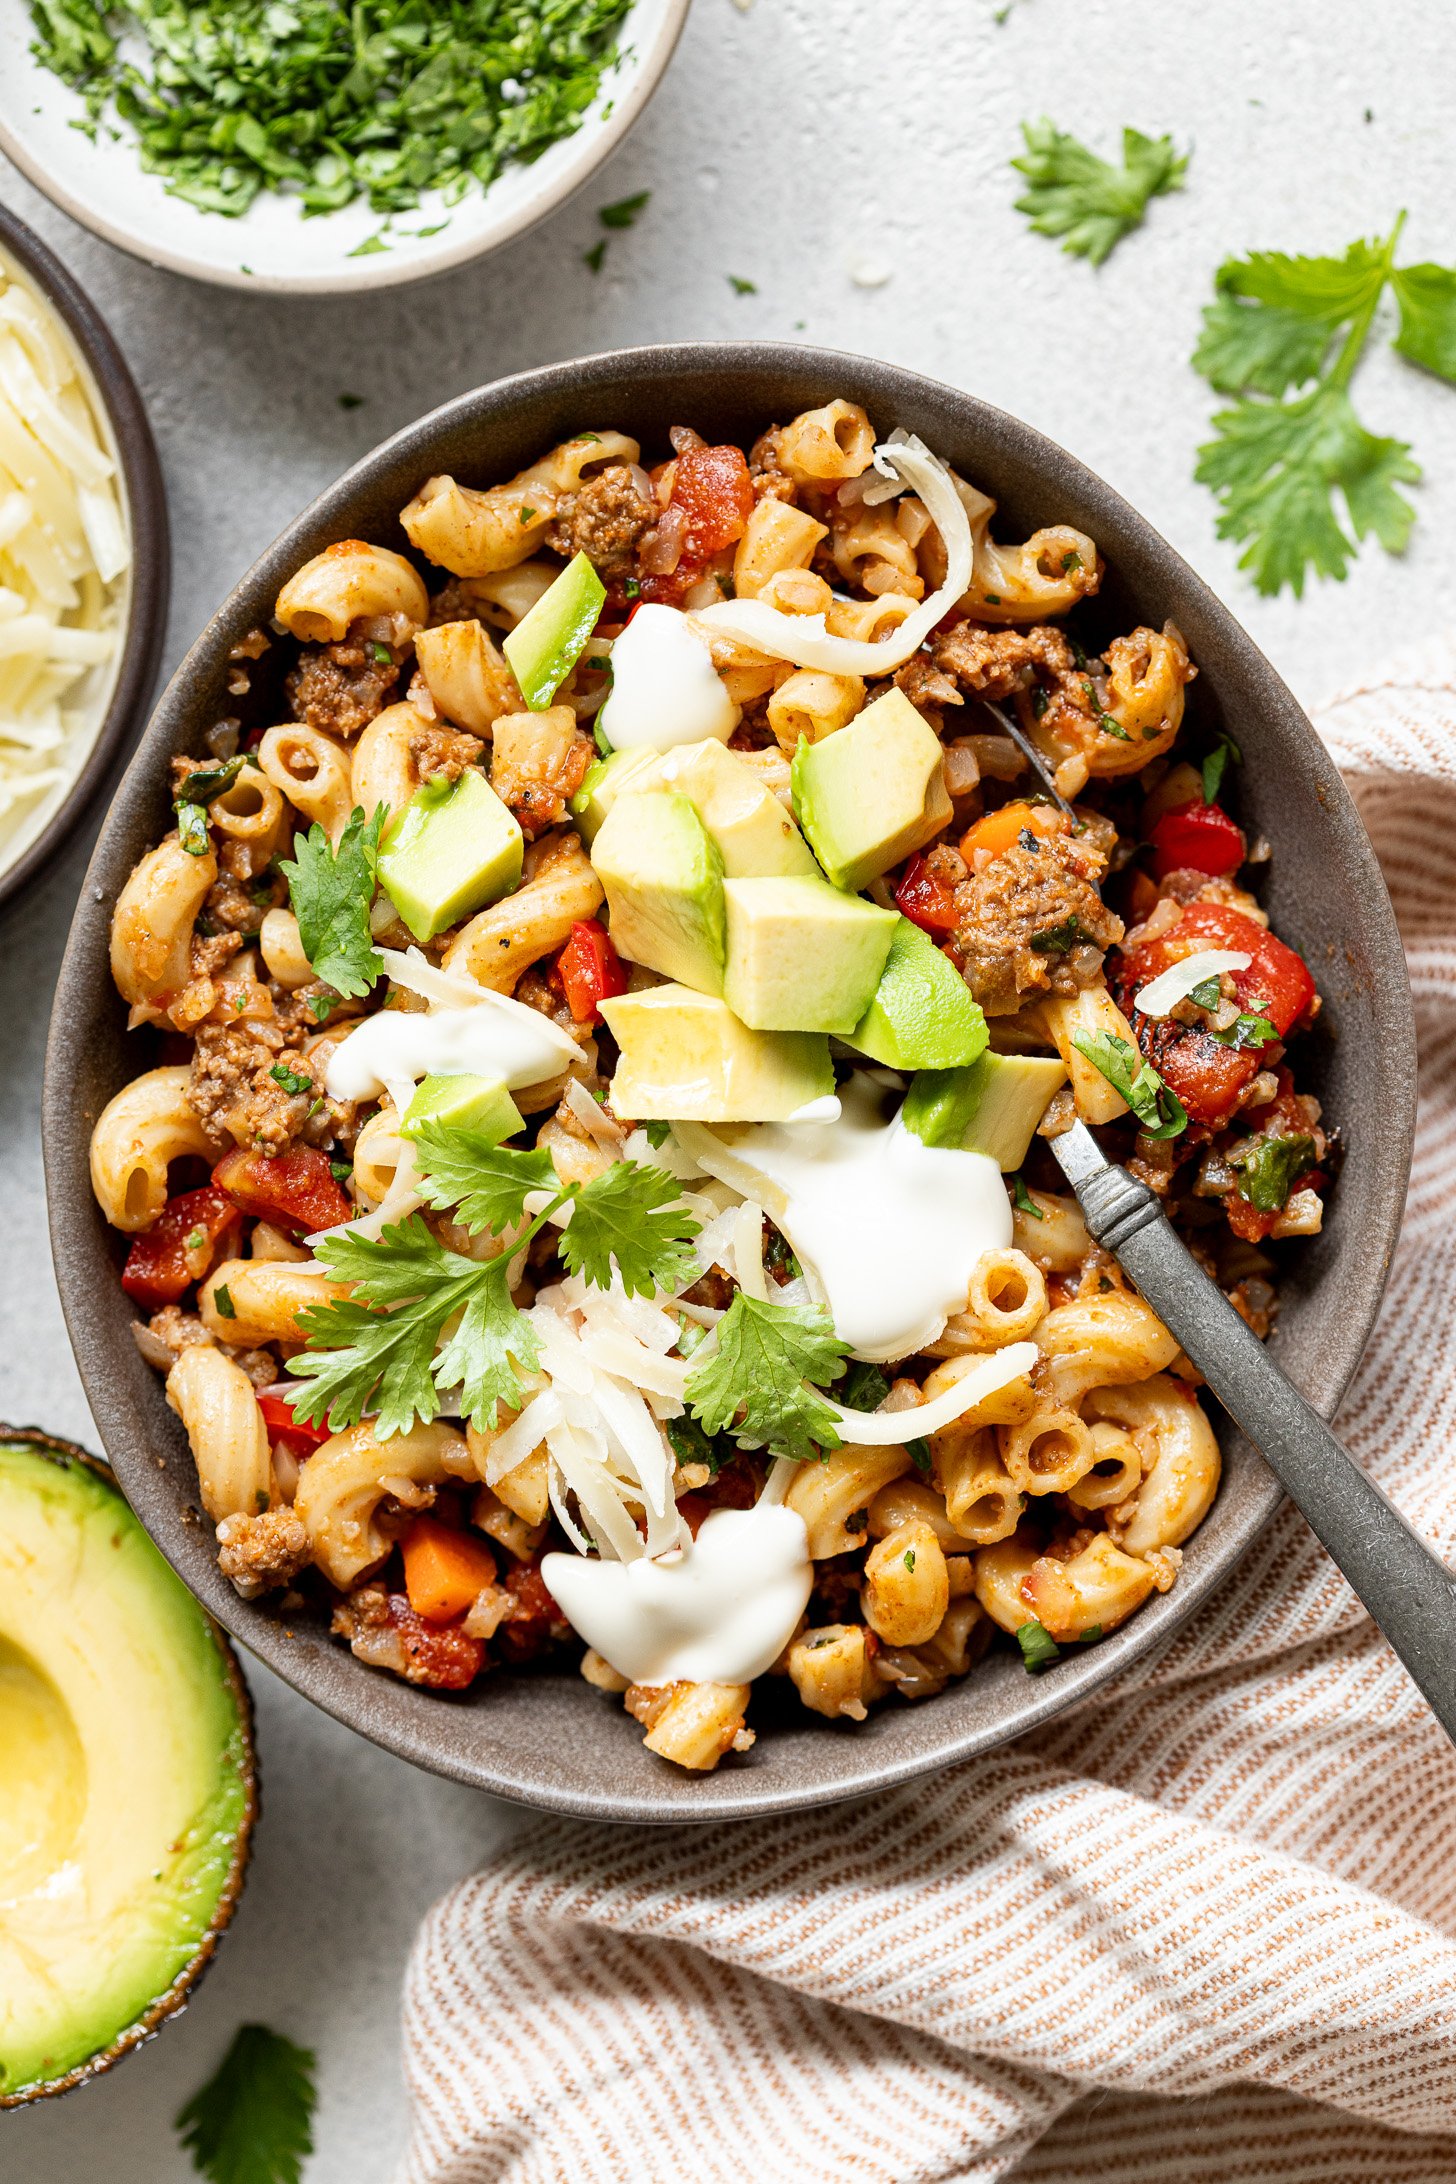 A bowl of veggie-loaded taco pasta in a gray bowl with sour cream, avocado, grated cheese, and fresh cilantro on top. There is a fork in the bowl. There is a striped napkin next to the bowl and bowls with toppings on the table.